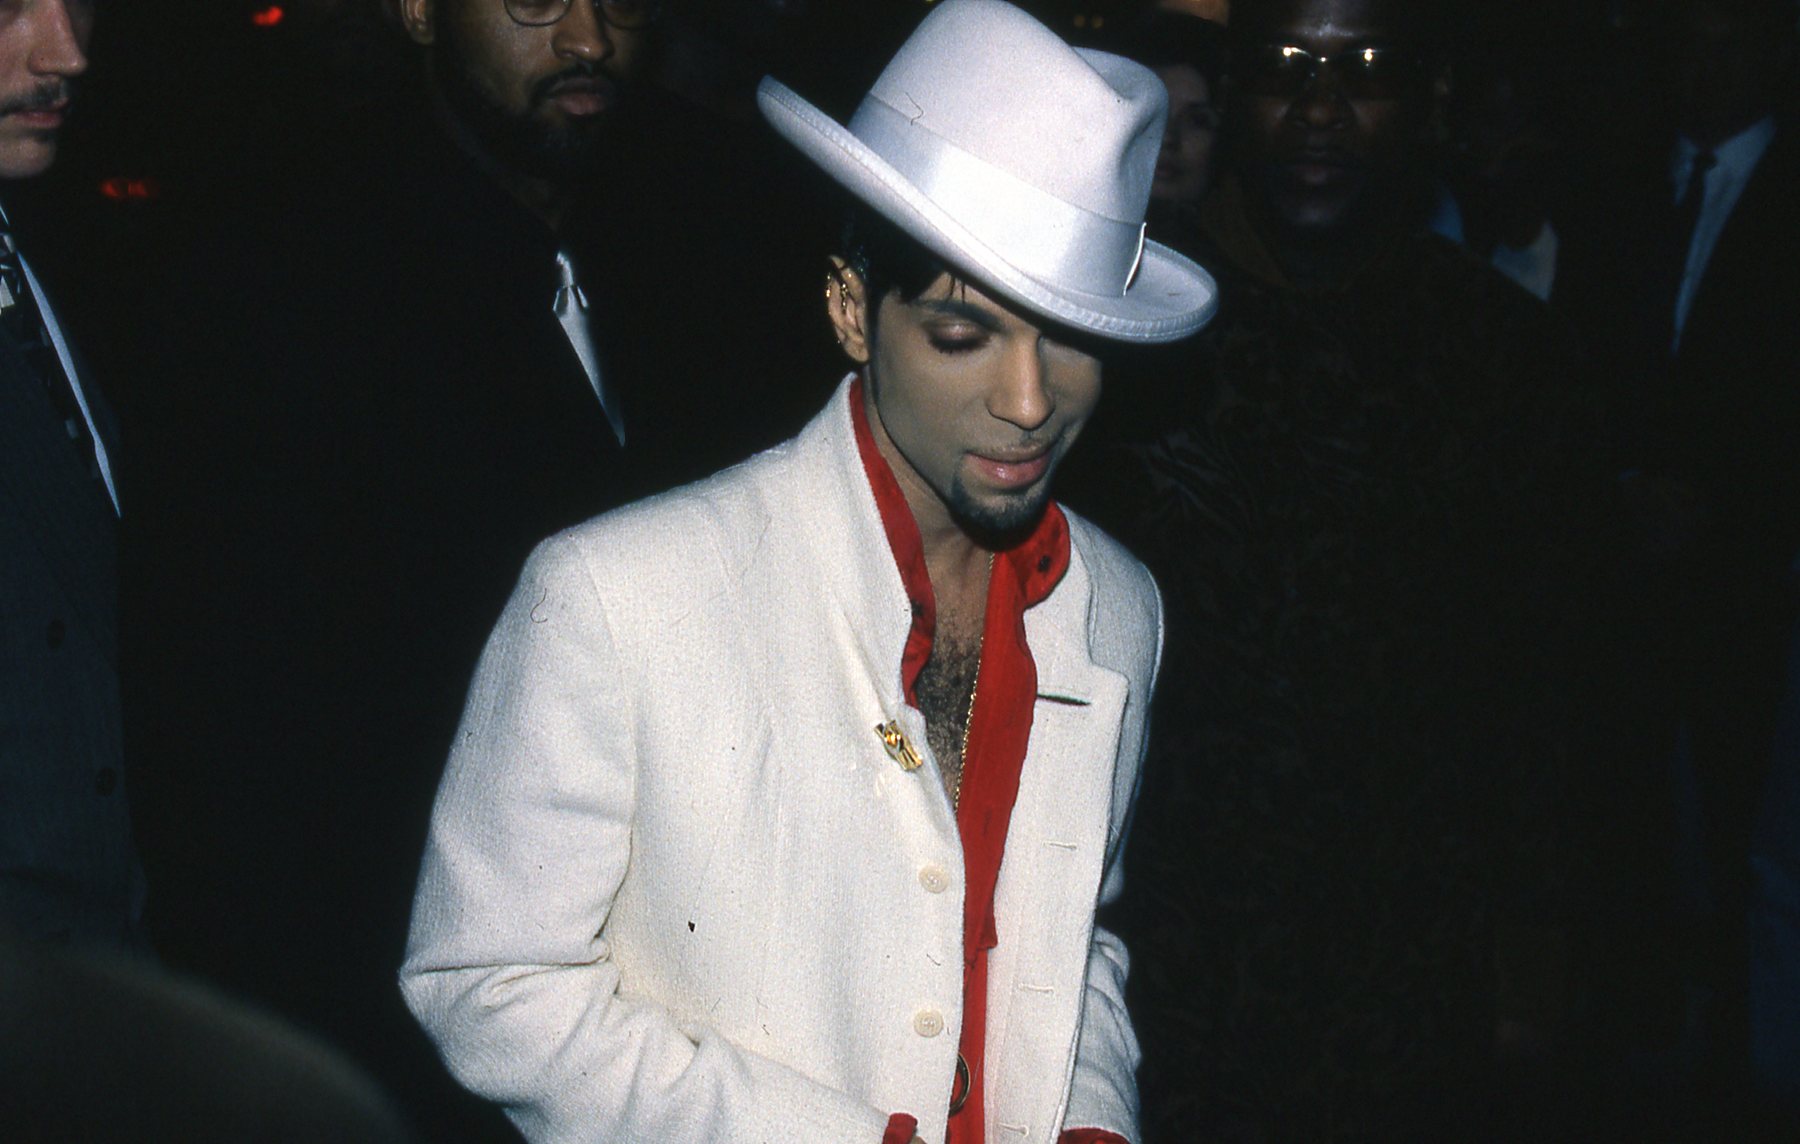 American musician Prince (1958 - 2016) arrives at the Life Cafe for a Grammy Awards afterparty, New York, New York, February 27, 1997. (Steve Eichner—Getty Images)